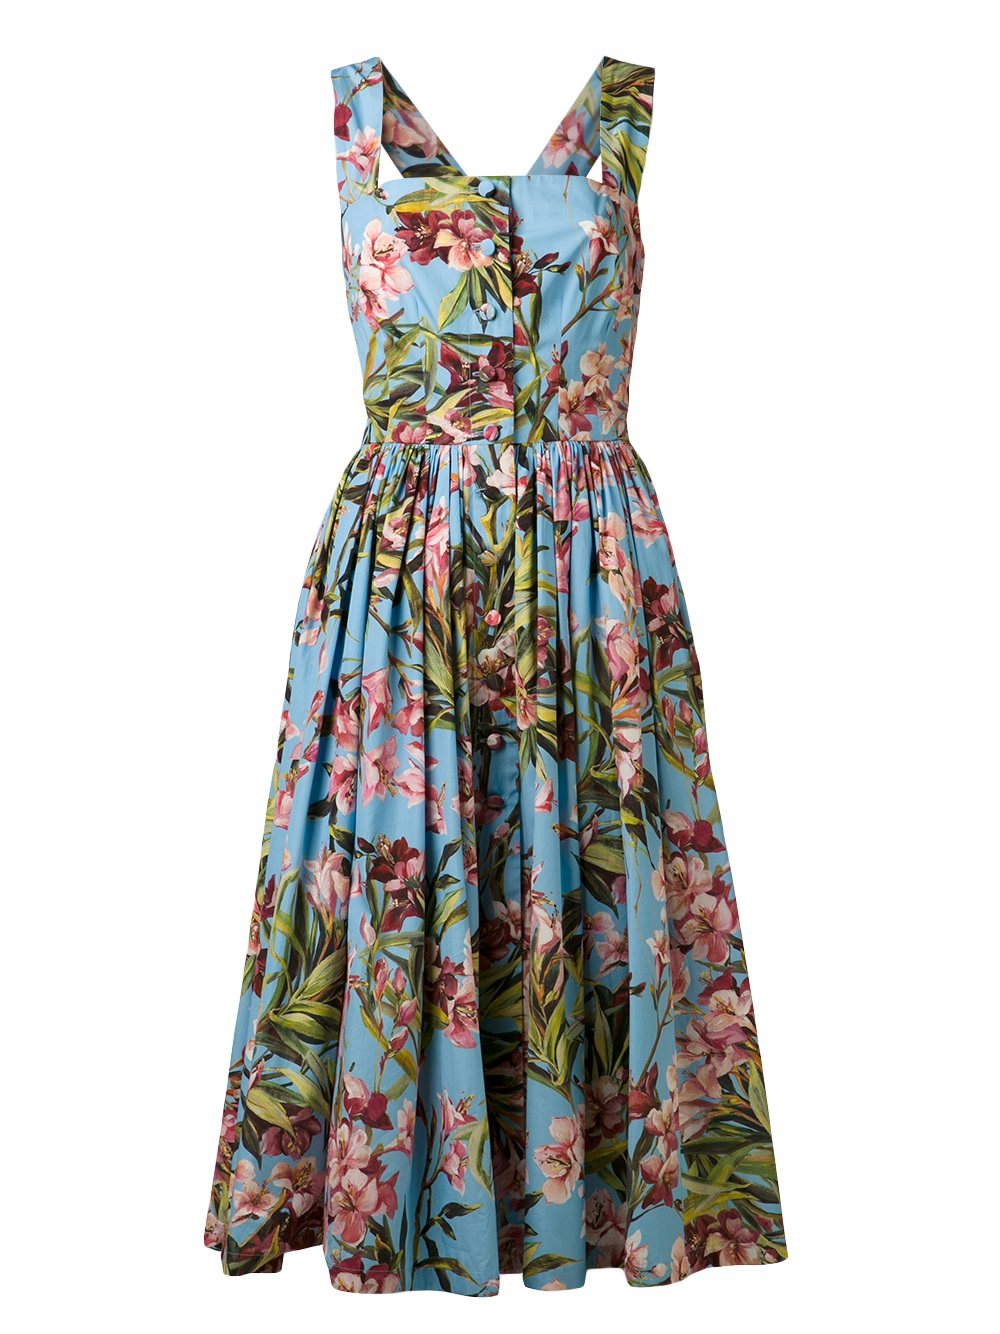 Dolce & gabbana Skirted Floral Dress in Blue | Lyst